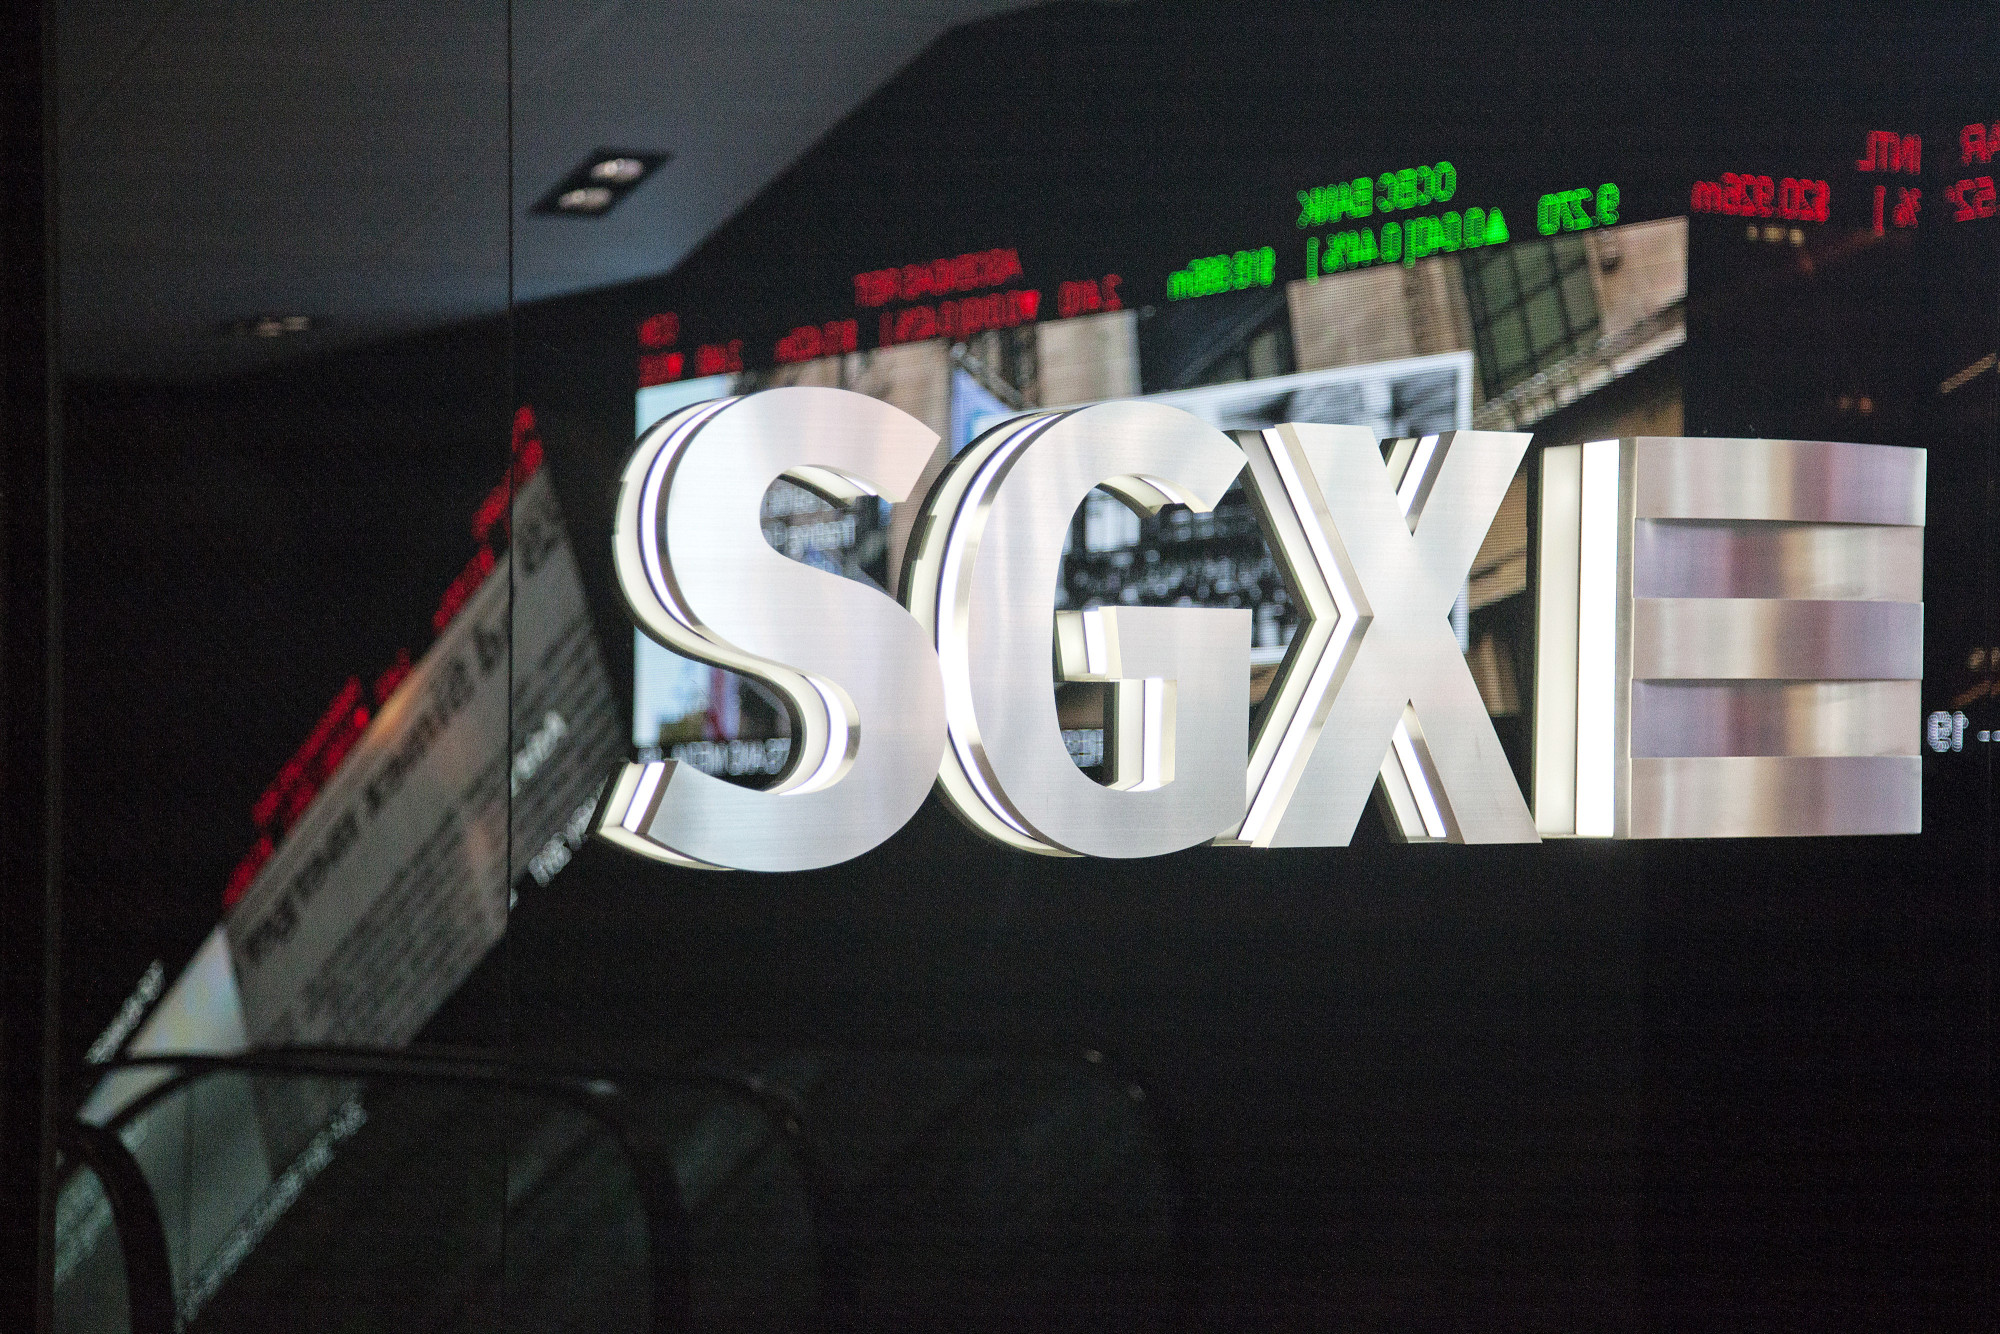 SGX CEO Loh Boon Chye Attends Second-Quarter Earnings News Conference